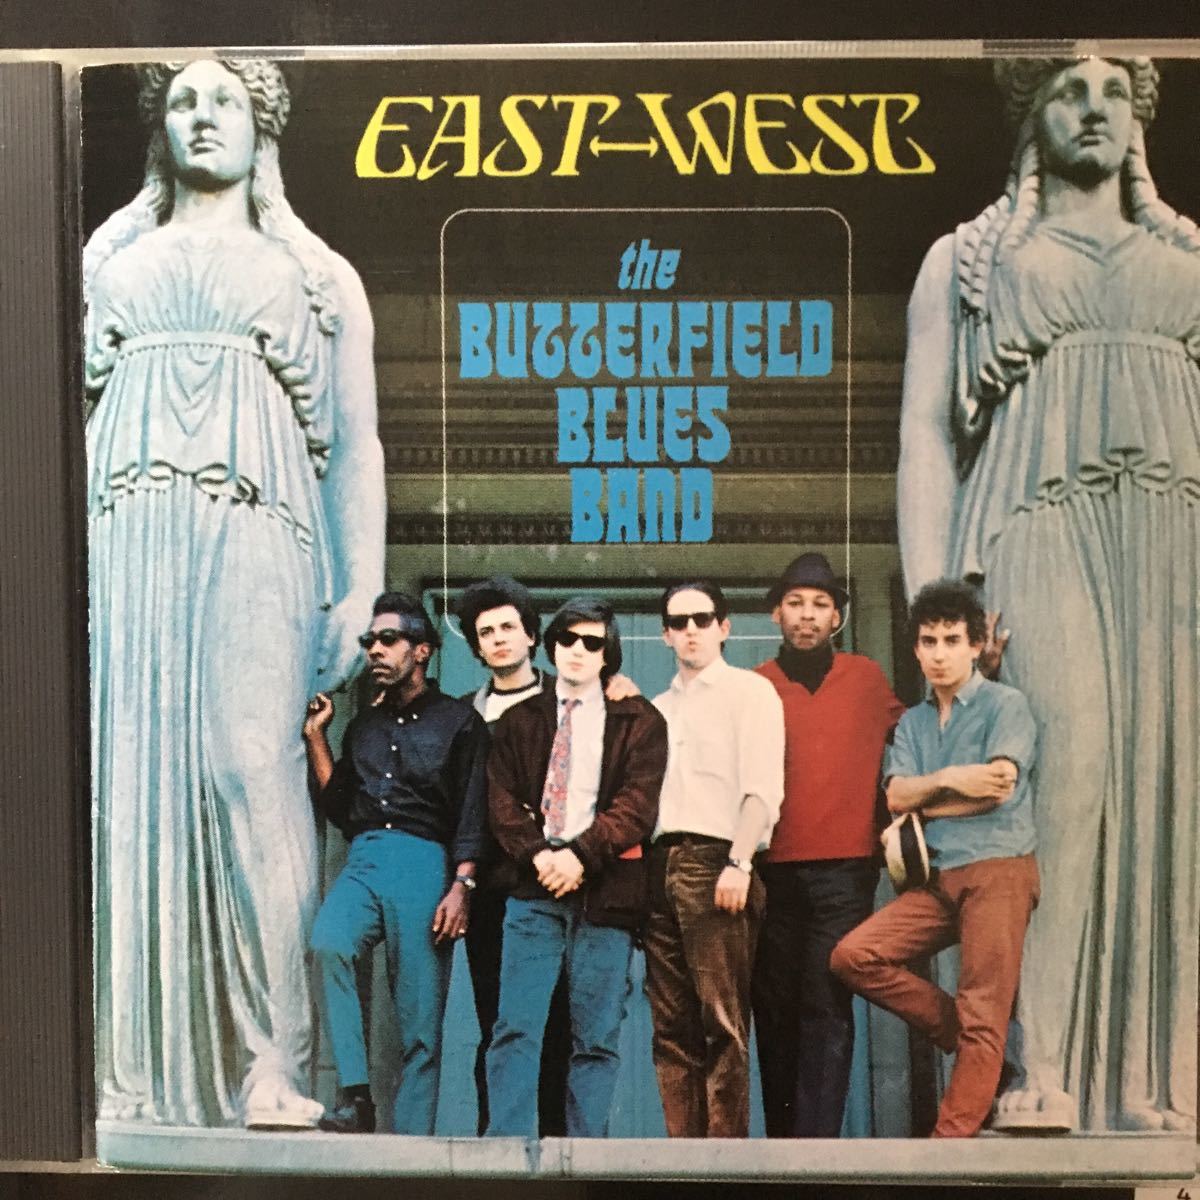 The Butterfield Blues Band / East-West_画像1